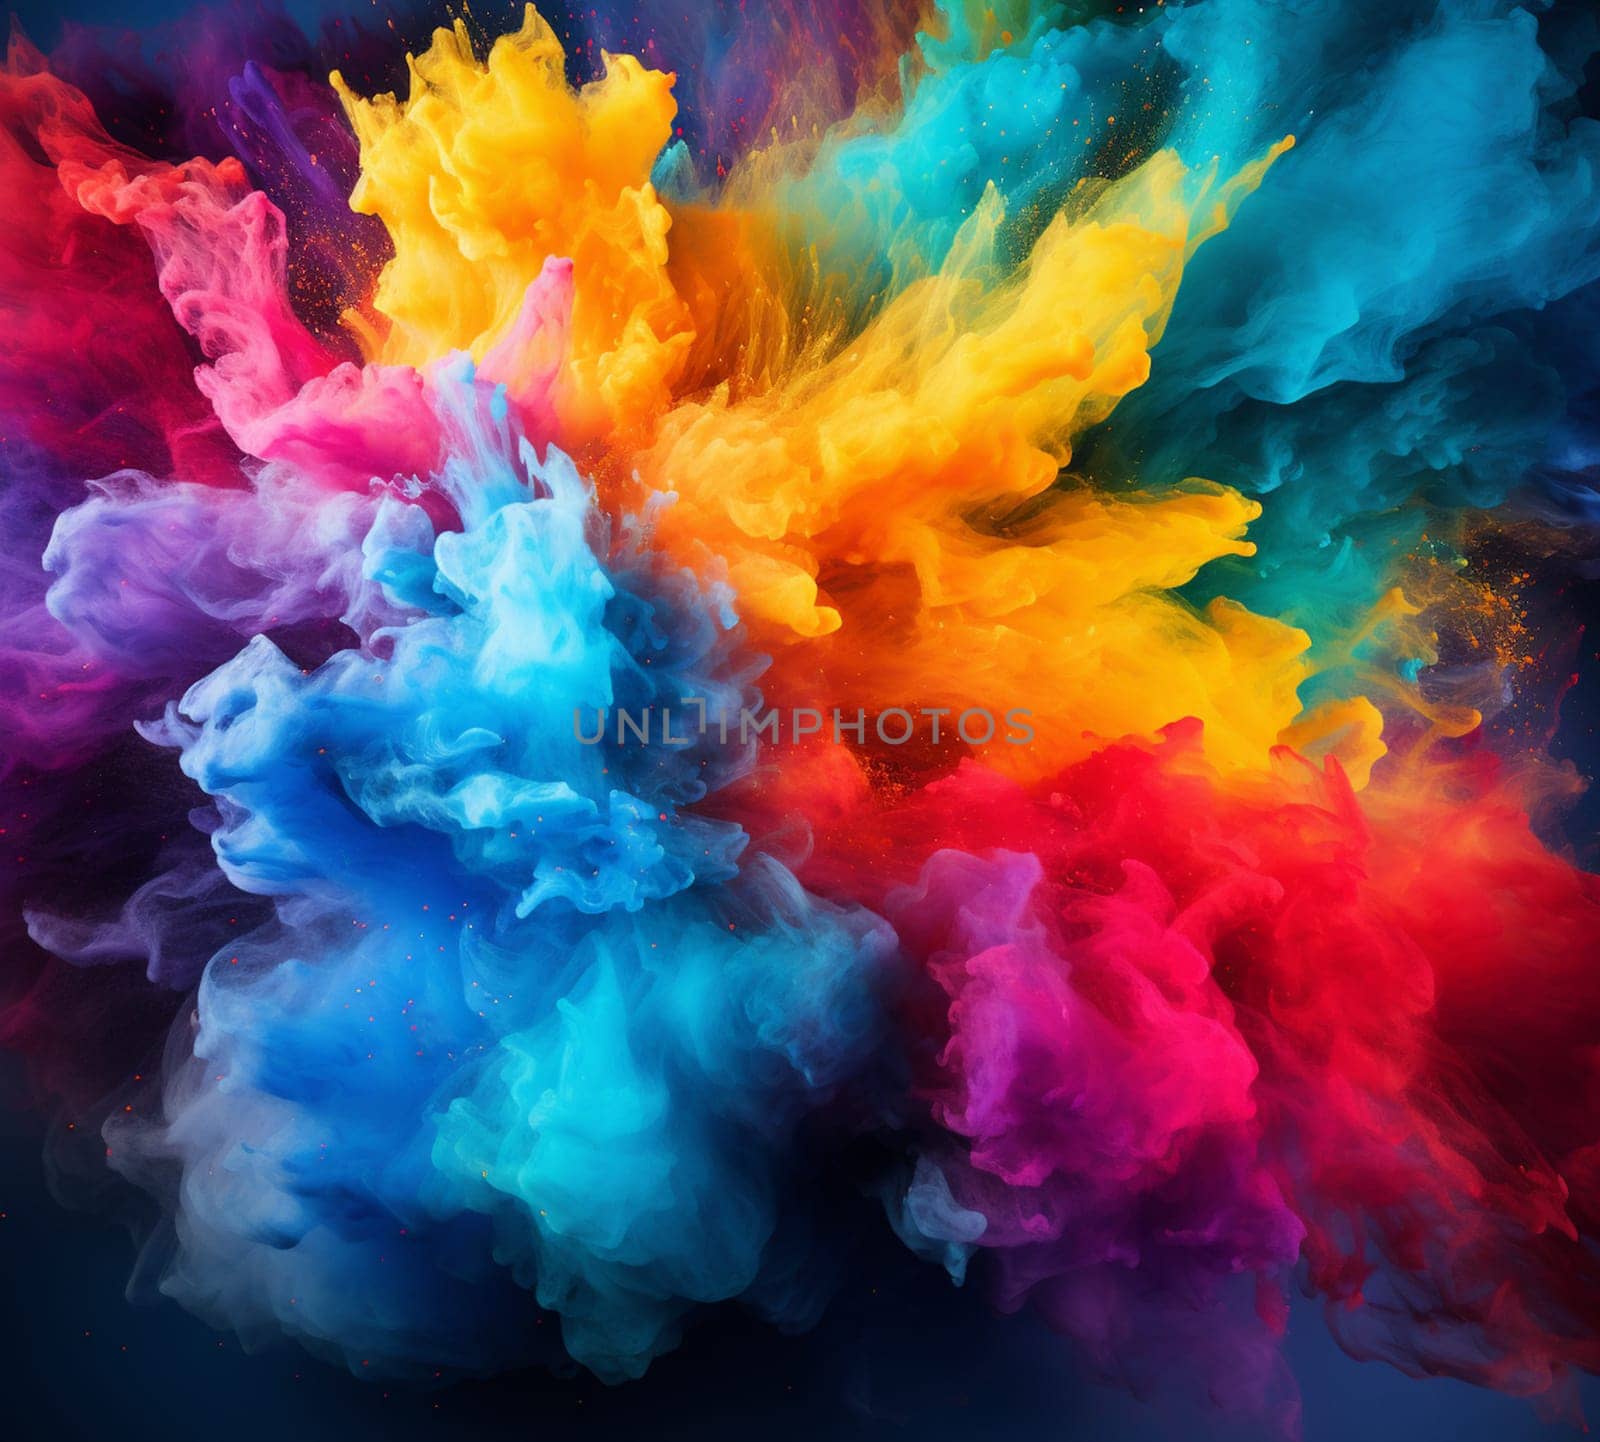 Motion Color drop in water,Ink swirling in ,Colorful ink abstraction.Fancy Dream Cloud of ink under water. High quality photo